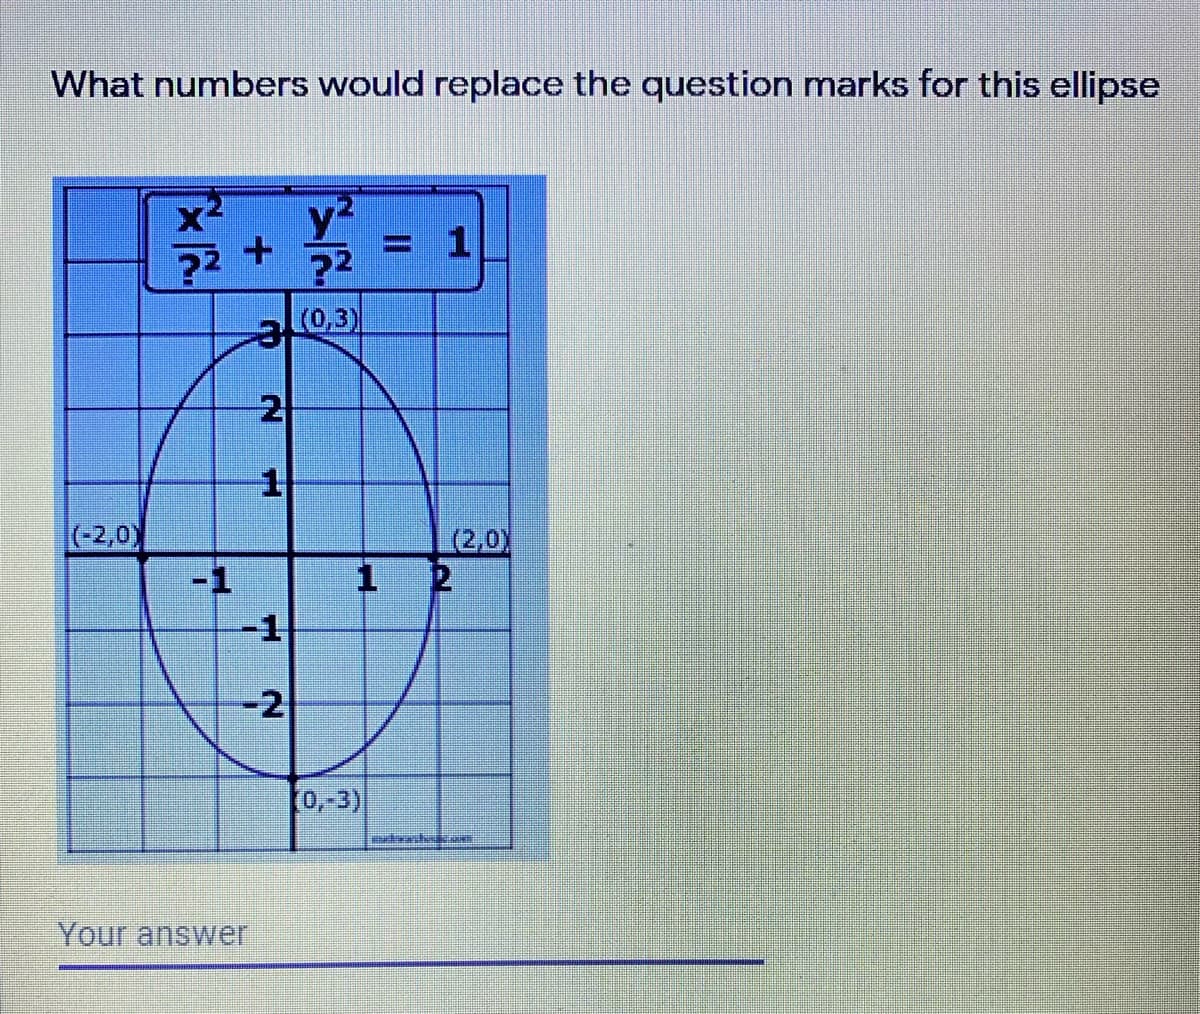 What numbers would replace the question marks for this ellipse
x2
22
?2
(-2,0)
-1
(2,0)
1 2
-1
0,-3)
Your answer
N.
2.
